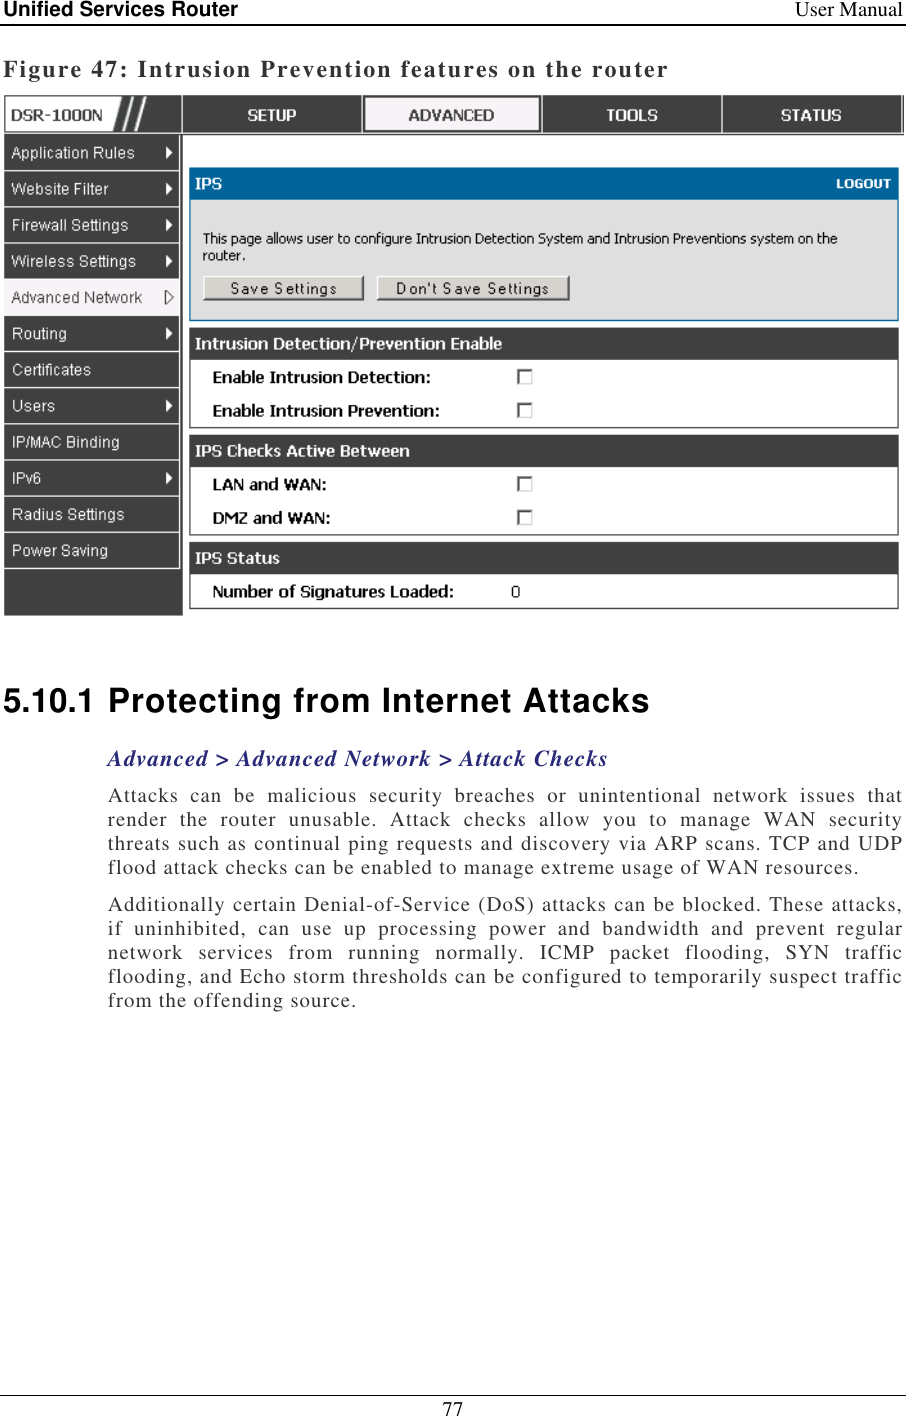 Unified Services Router    User Manual 77  Figure 47: Intrusion Prevention features on the router   5.10.1 Protecting from Internet Attacks Advanced &gt; Advanced Network &gt; Attack Checks Attacks  can  be  malicious  security  breaches  or  unintentional  network  issues  that render  the  router  unusable.  Attack  checks  allow  you  to  manage  WAN  security threats such as continual ping requests and discovery via ARP scans. TCP and UDP flood attack checks can be enabled to manage extreme usage of WAN resources.  Additionally certain Denial-of-Service (DoS) attacks can be blocked. These attacks, if  uninhibited,  can  use  up  processing  power  and  bandwidth  and  prevent  regular network  services  from  running  normally.  ICMP  packet  flooding,  SYN  traffic flooding, and Echo storm thresholds can be configured to temporarily suspect traffic from the offending source.  